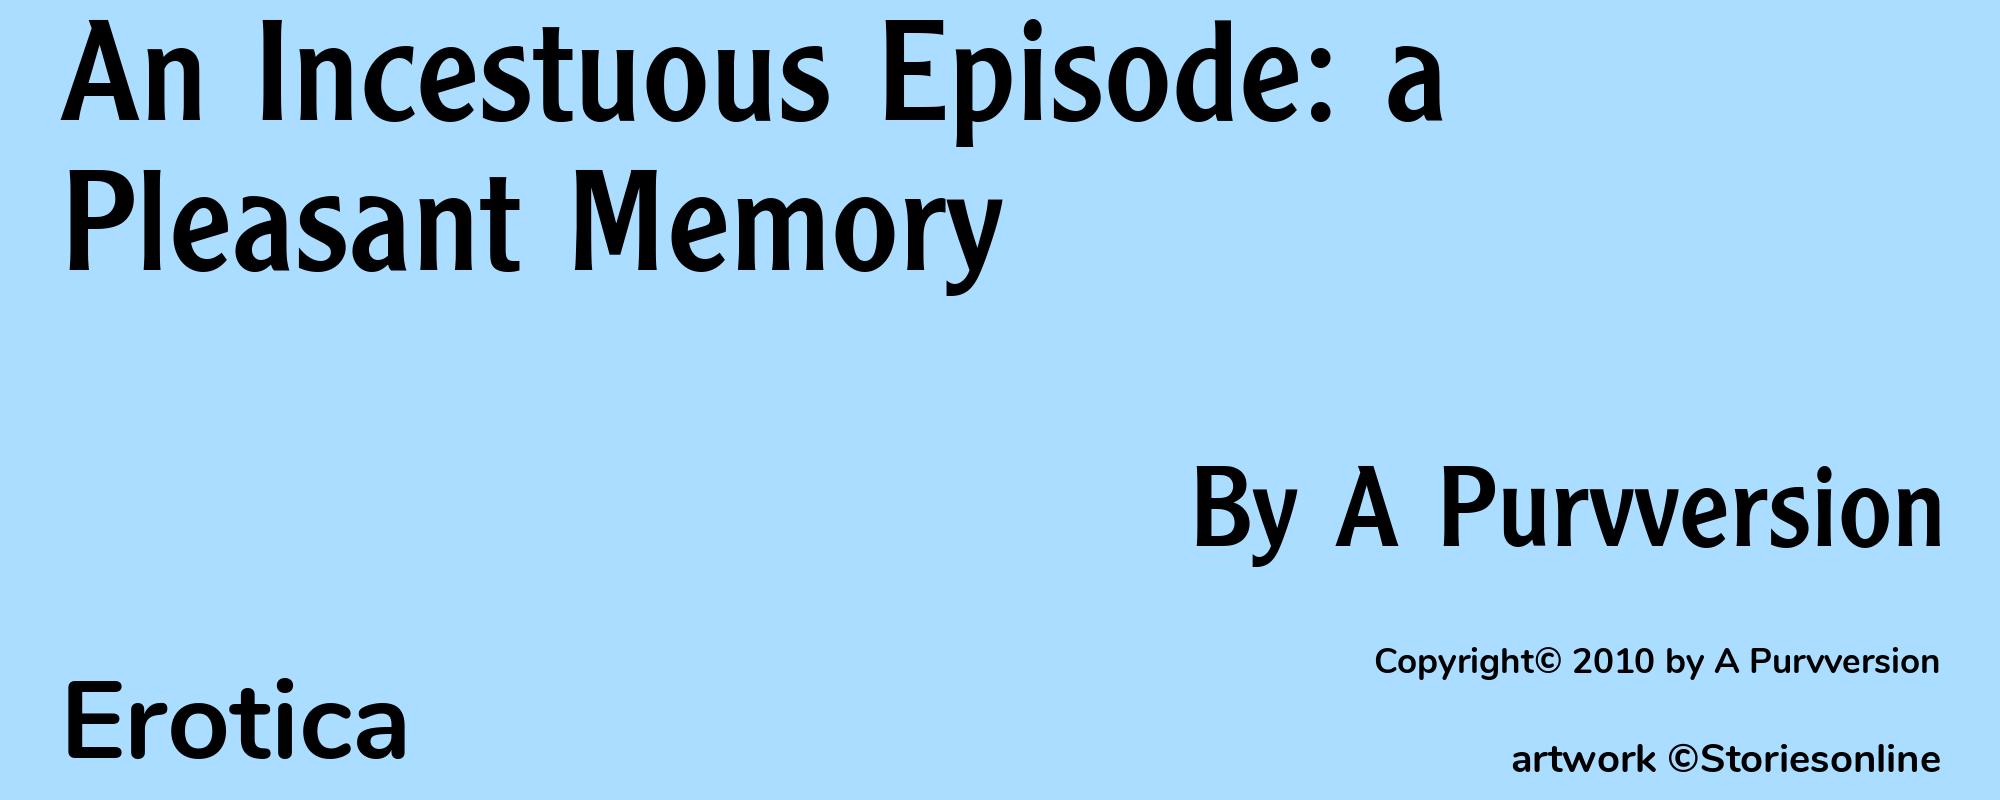 An Incestuous Episode: a Pleasant Memory - Cover